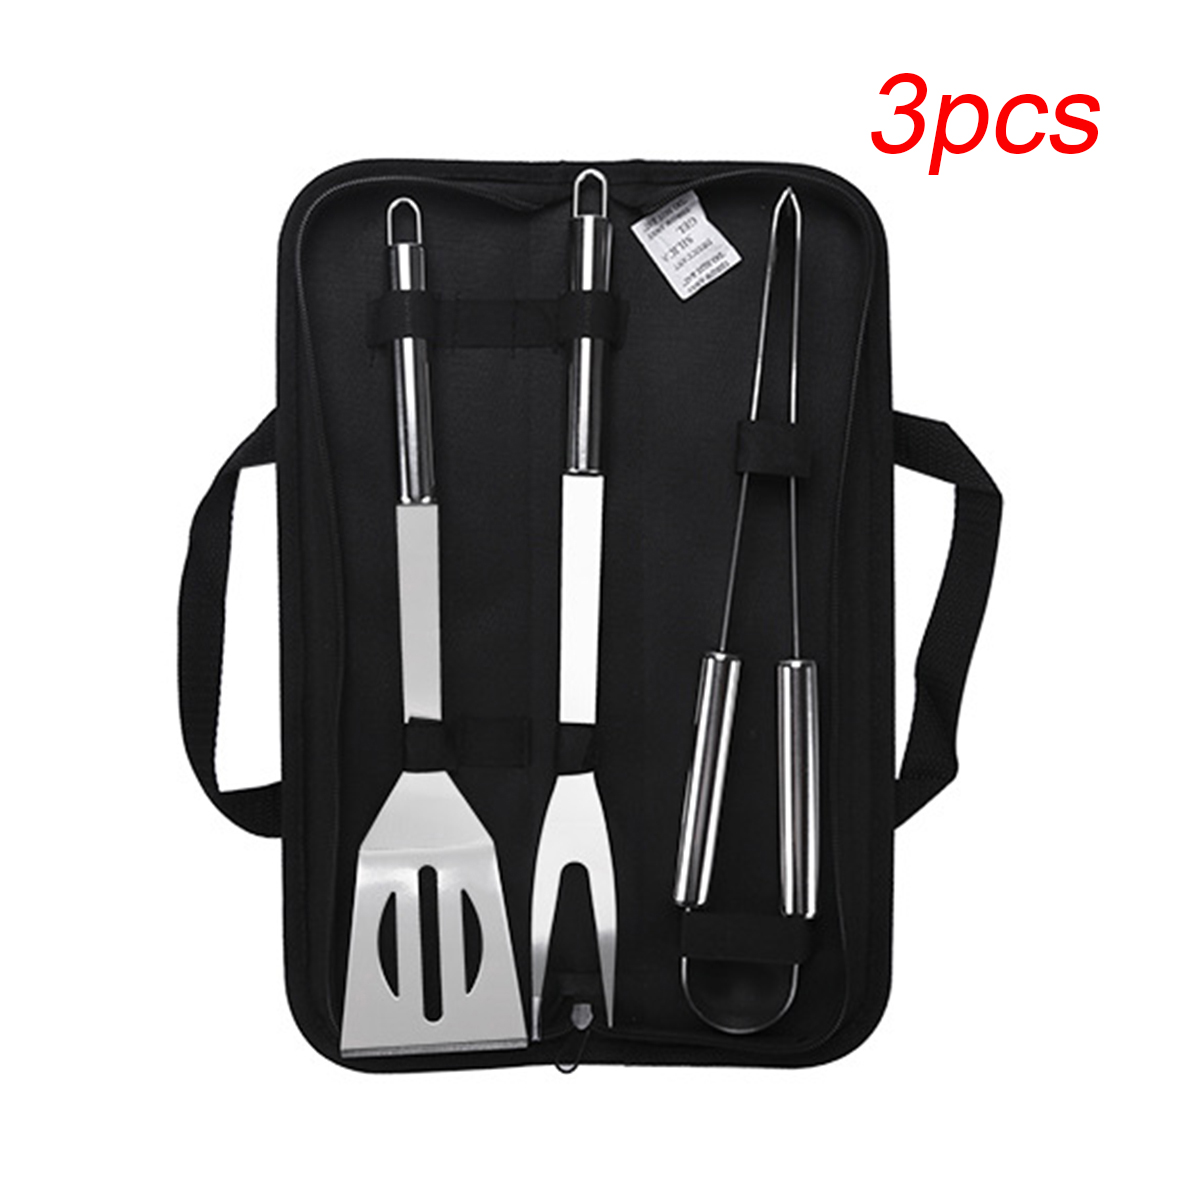 Stainless-Steel-BBQ-Tools-Set-Barbecue-Grilling-Utensil-Accessories-Camping-Outdoor-Cooking-1676473-8